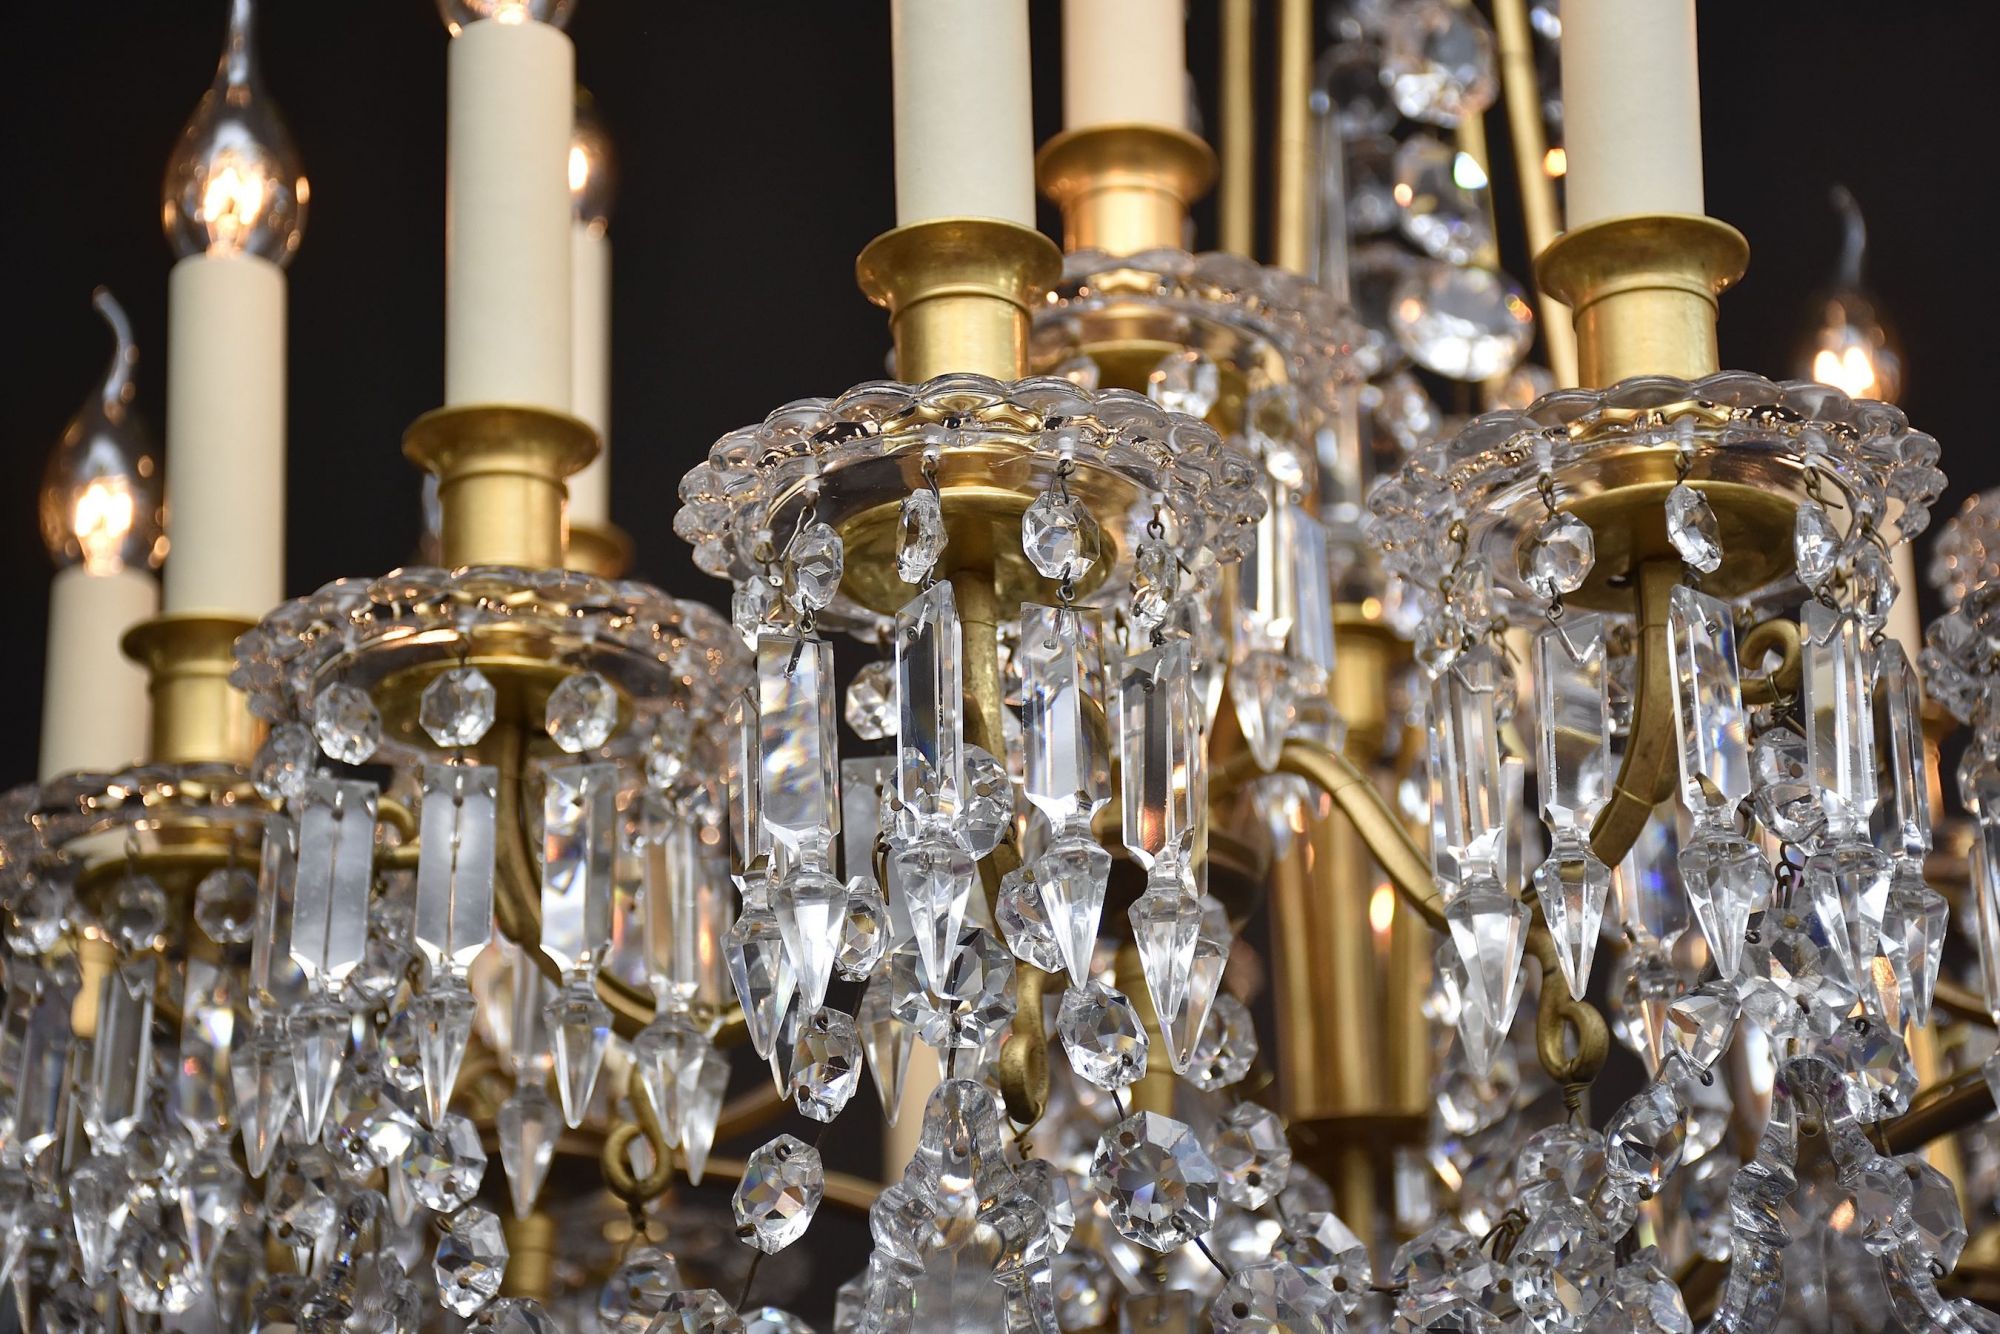 Antique French Baccarat chandelier in the style of Louis XVI